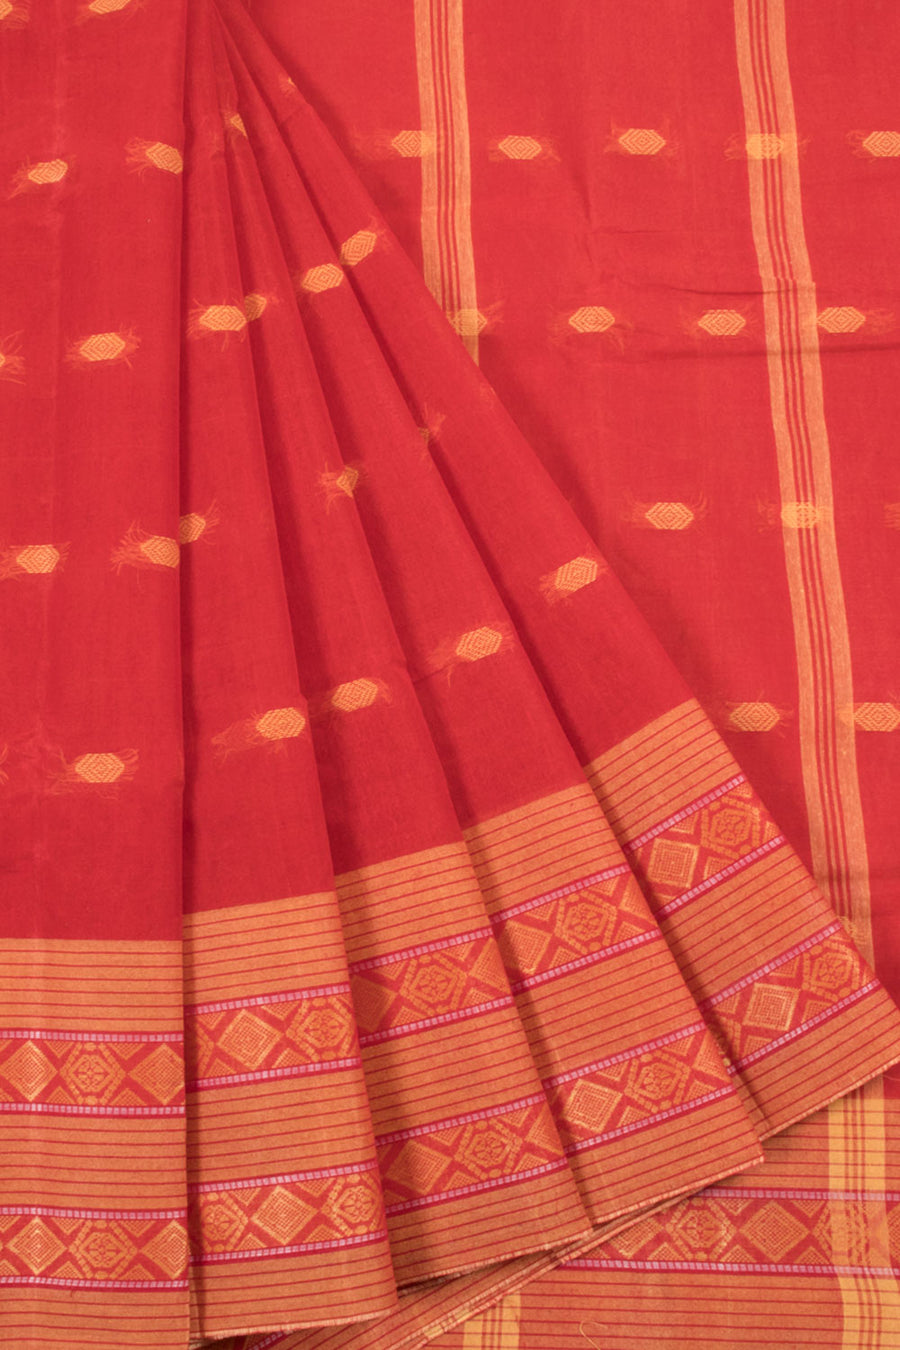 Red Handwoven Bengal Tant Cotton Saree with Geometric Motifs, Geometric Design and Stripes Border, Stripes Design Pallu and without Blouse